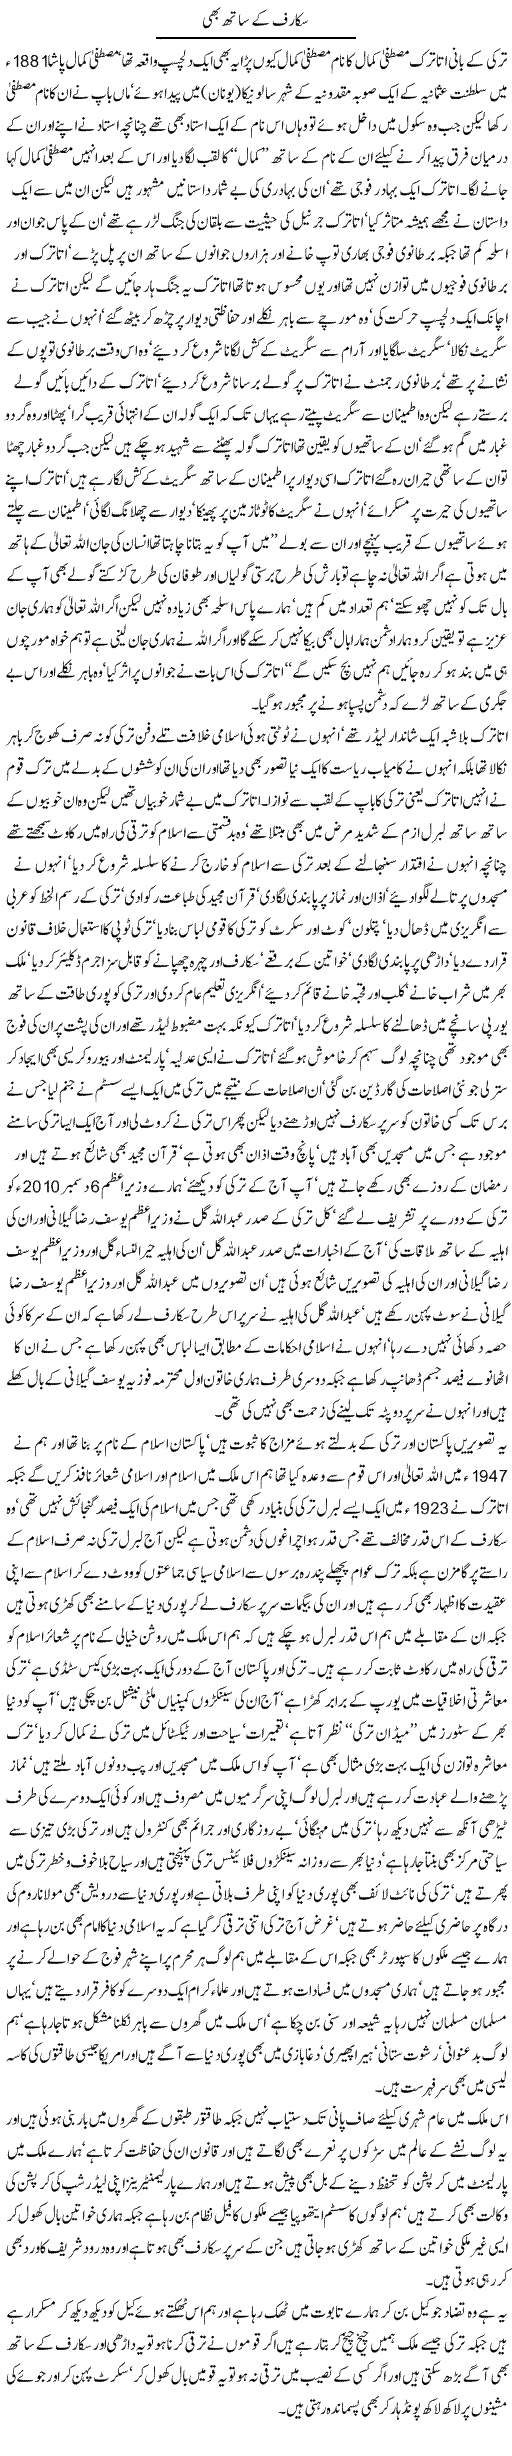 Even With Scarf Express Column Javed Chaudhry 9 December 2010